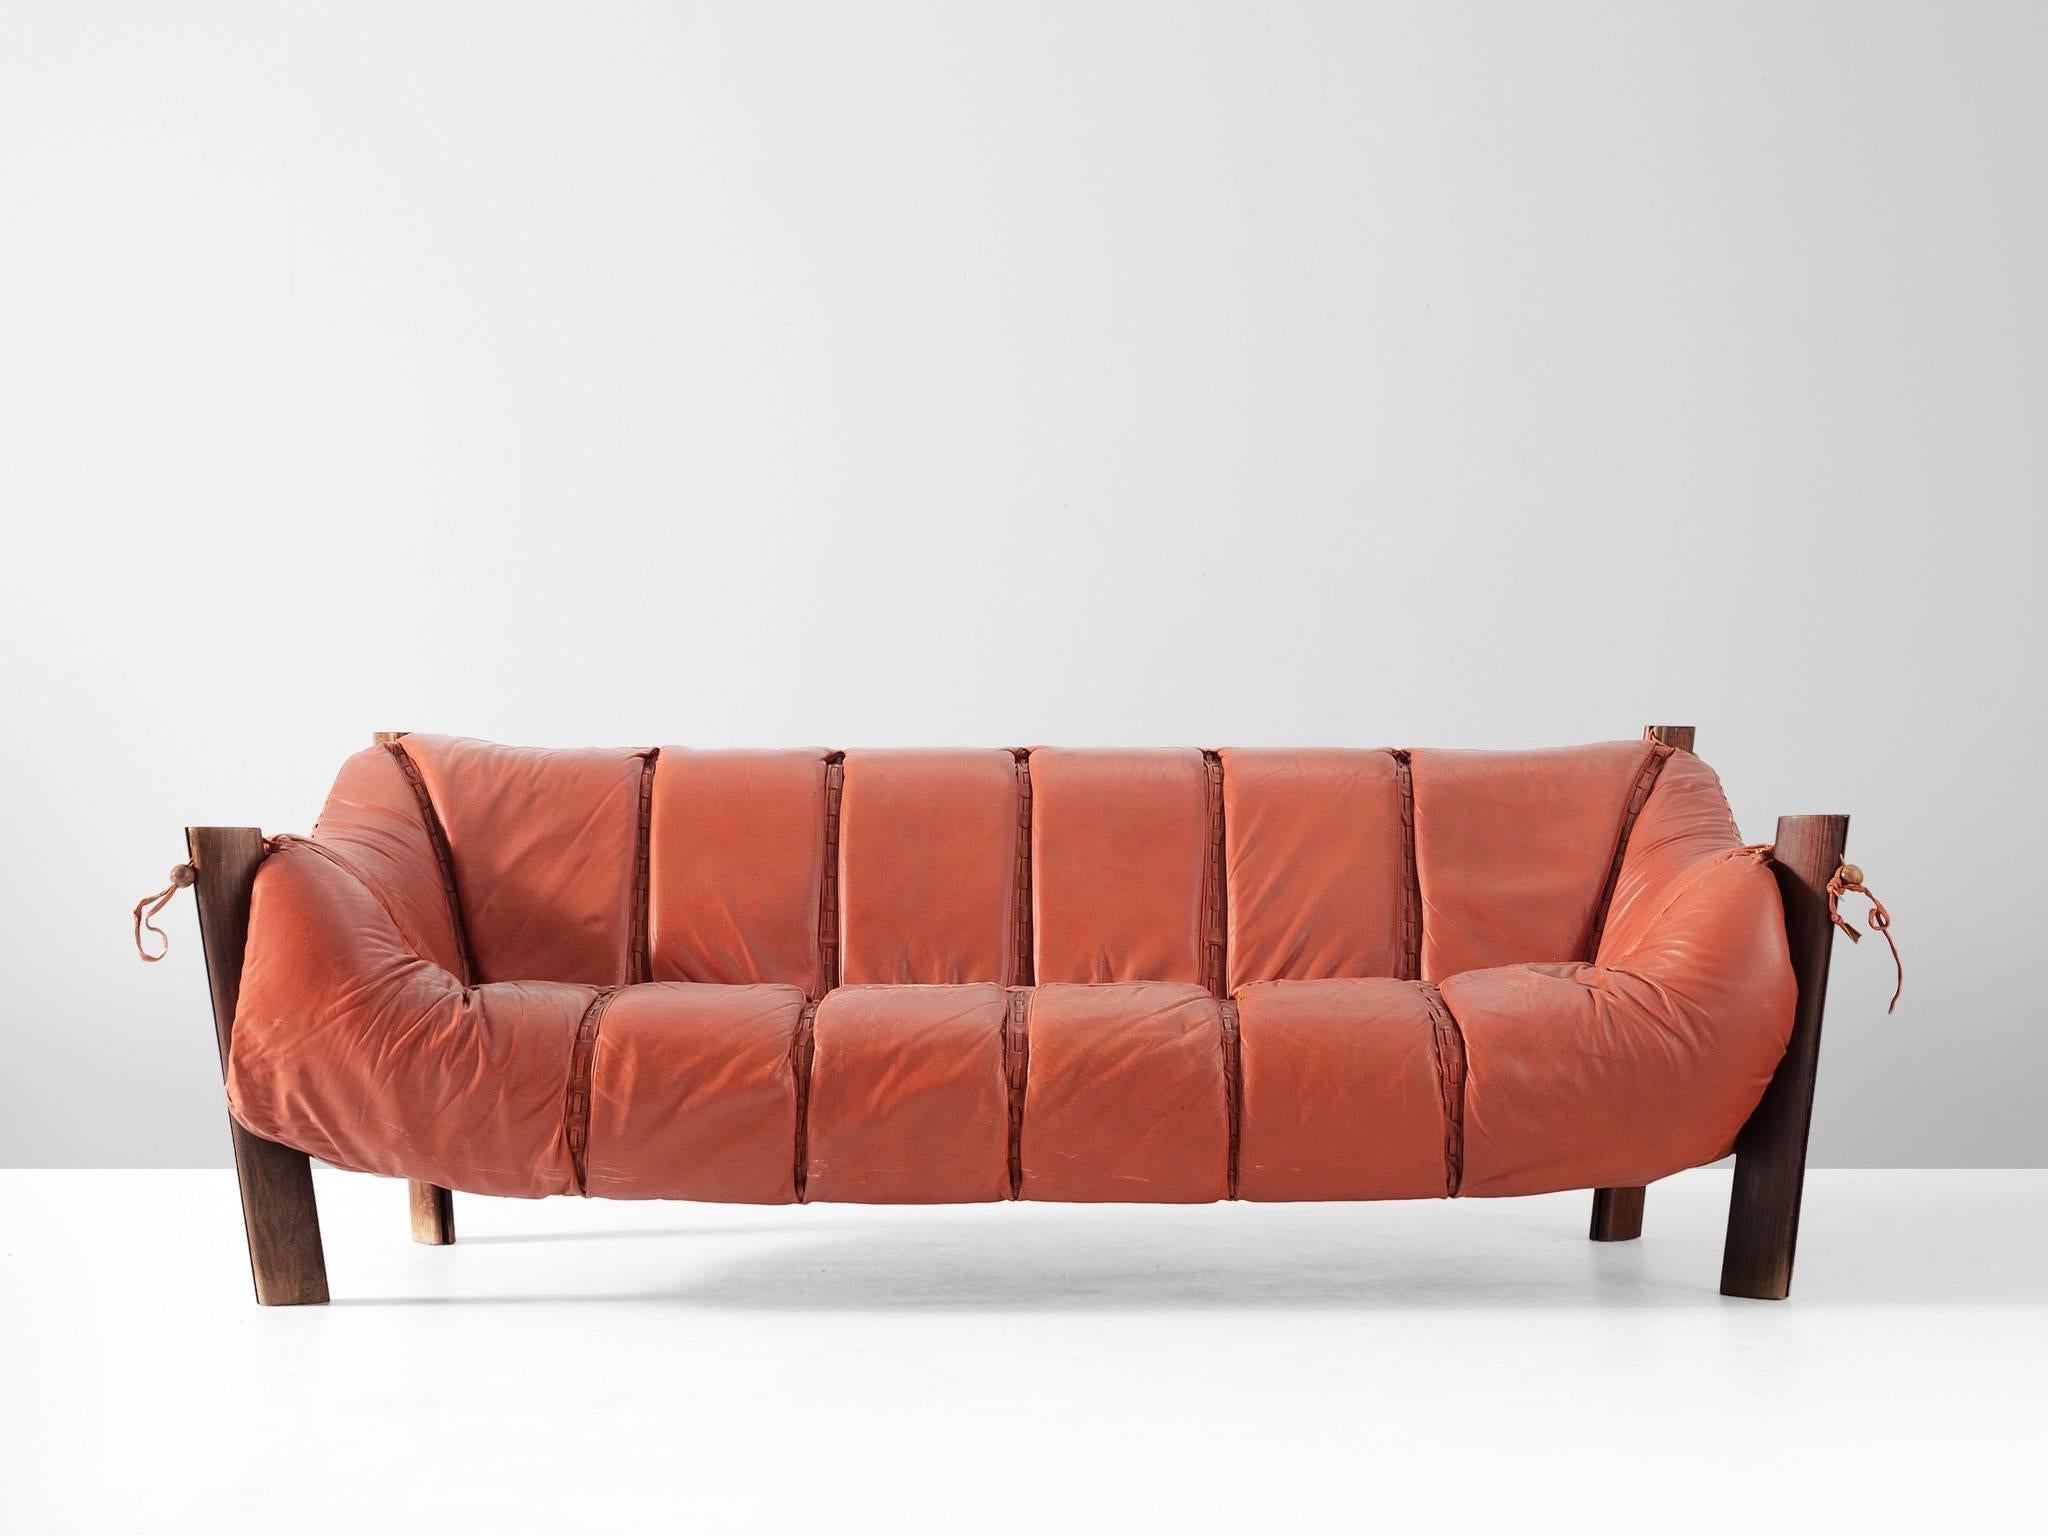 Sofa model MP-211, in jacaranda wood and leather, by Percival Lafer, Brazil 1974.

Three-seat sofa by Brazilian designer Percival Lafer. This sofa consist of a solid Jacaranda base in which the leather seating 'hangs'. Soft cushions are folded over